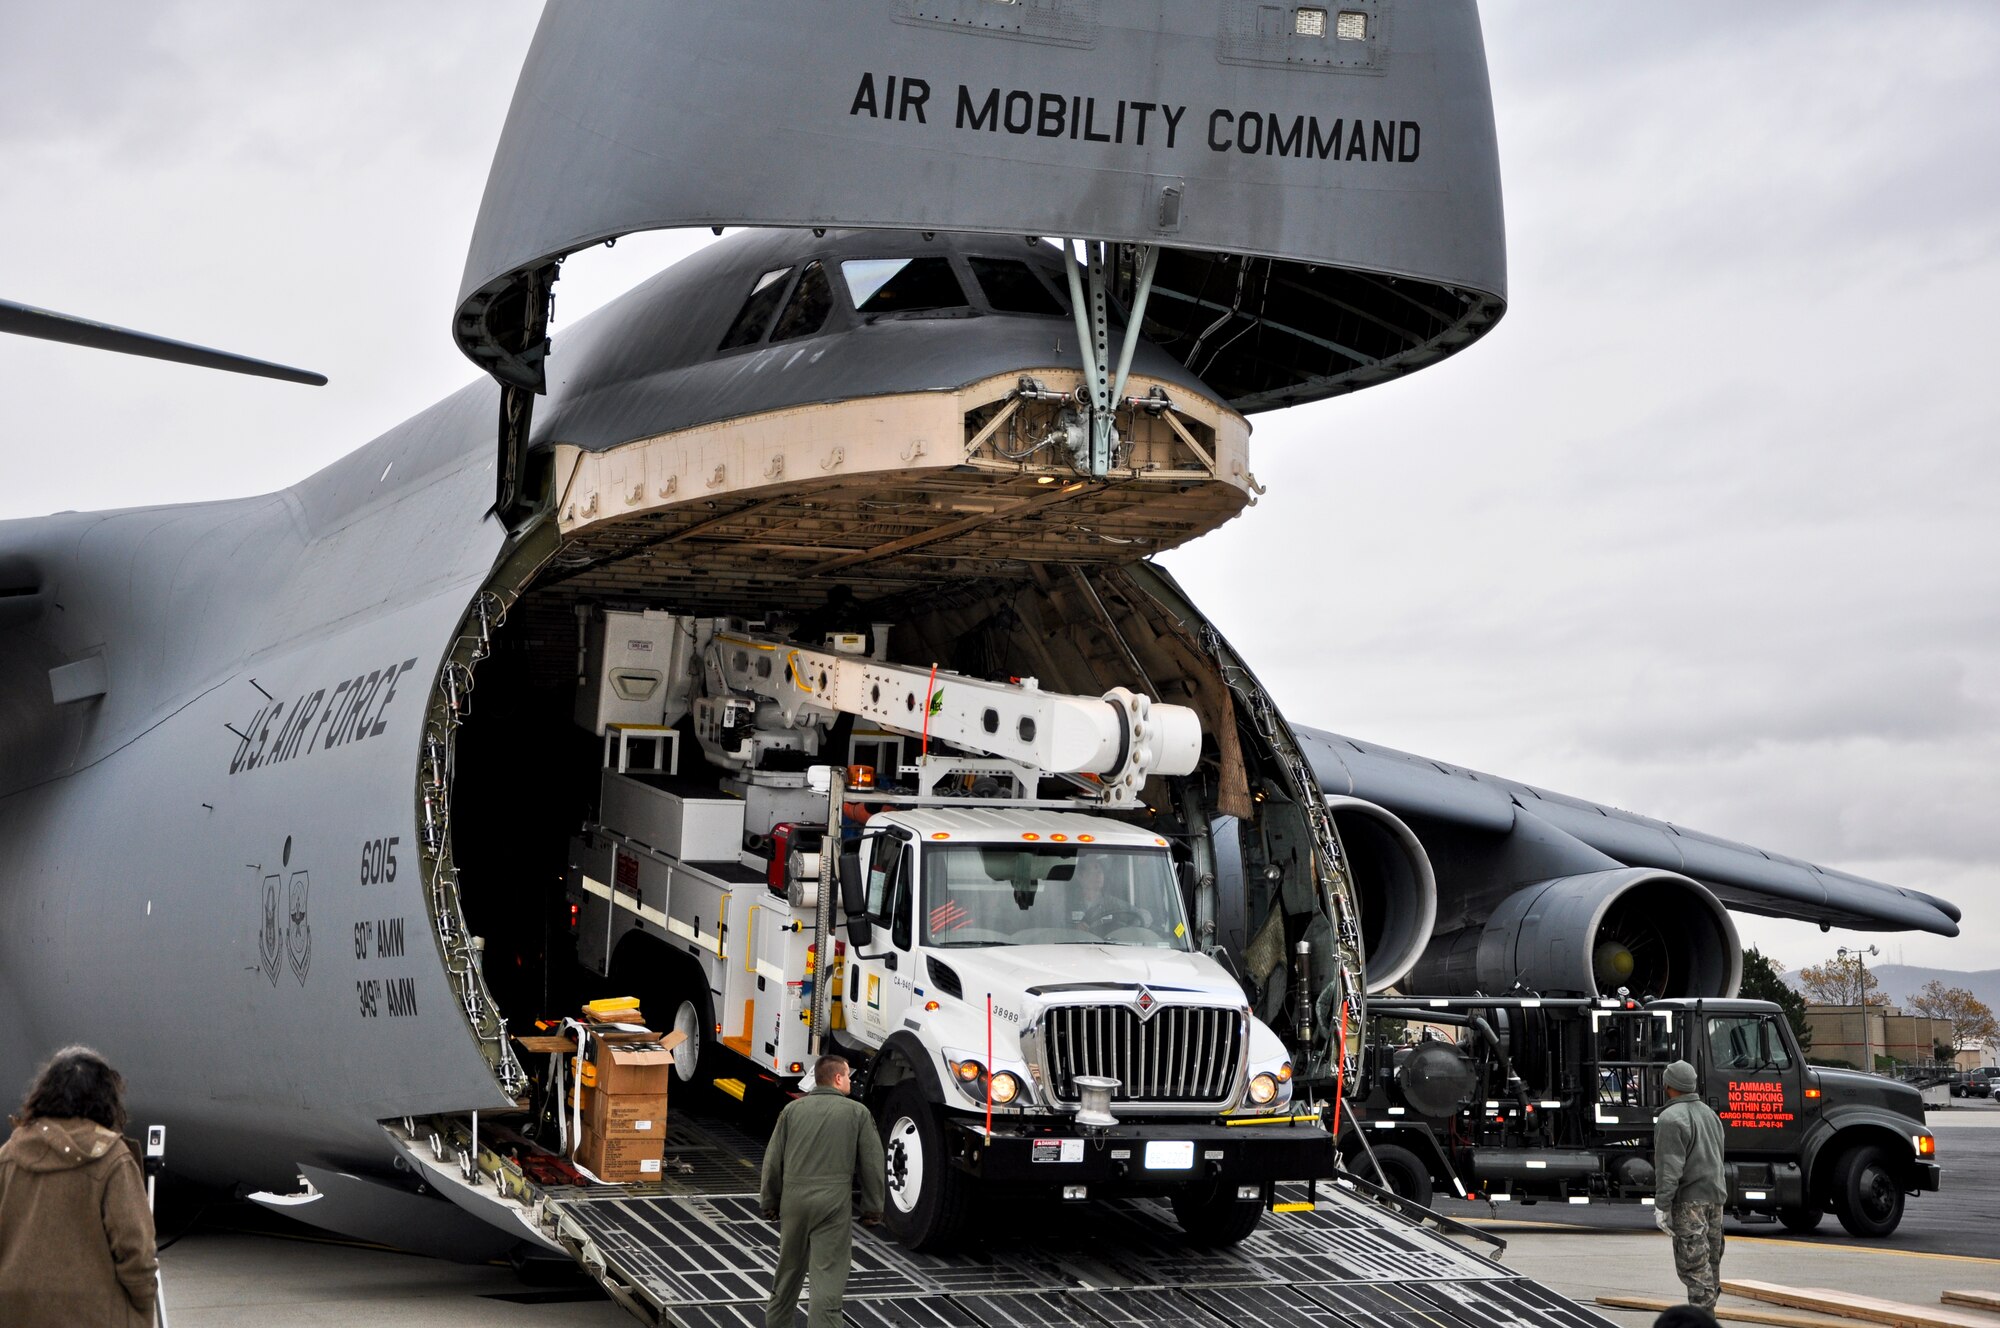 Air Force crews offload Southern California Edison power repair equipment from a C-5 Galaxy on Stewart Air National Guard Base in Newburgh, N.Y., Nov. 1, 2012. The Defense Department initiated the airlift operation to aid recovery efforts in Hurricane Sandy's aftermath. (U.S. Army photo/Master Sgt. Corine Lombardo)